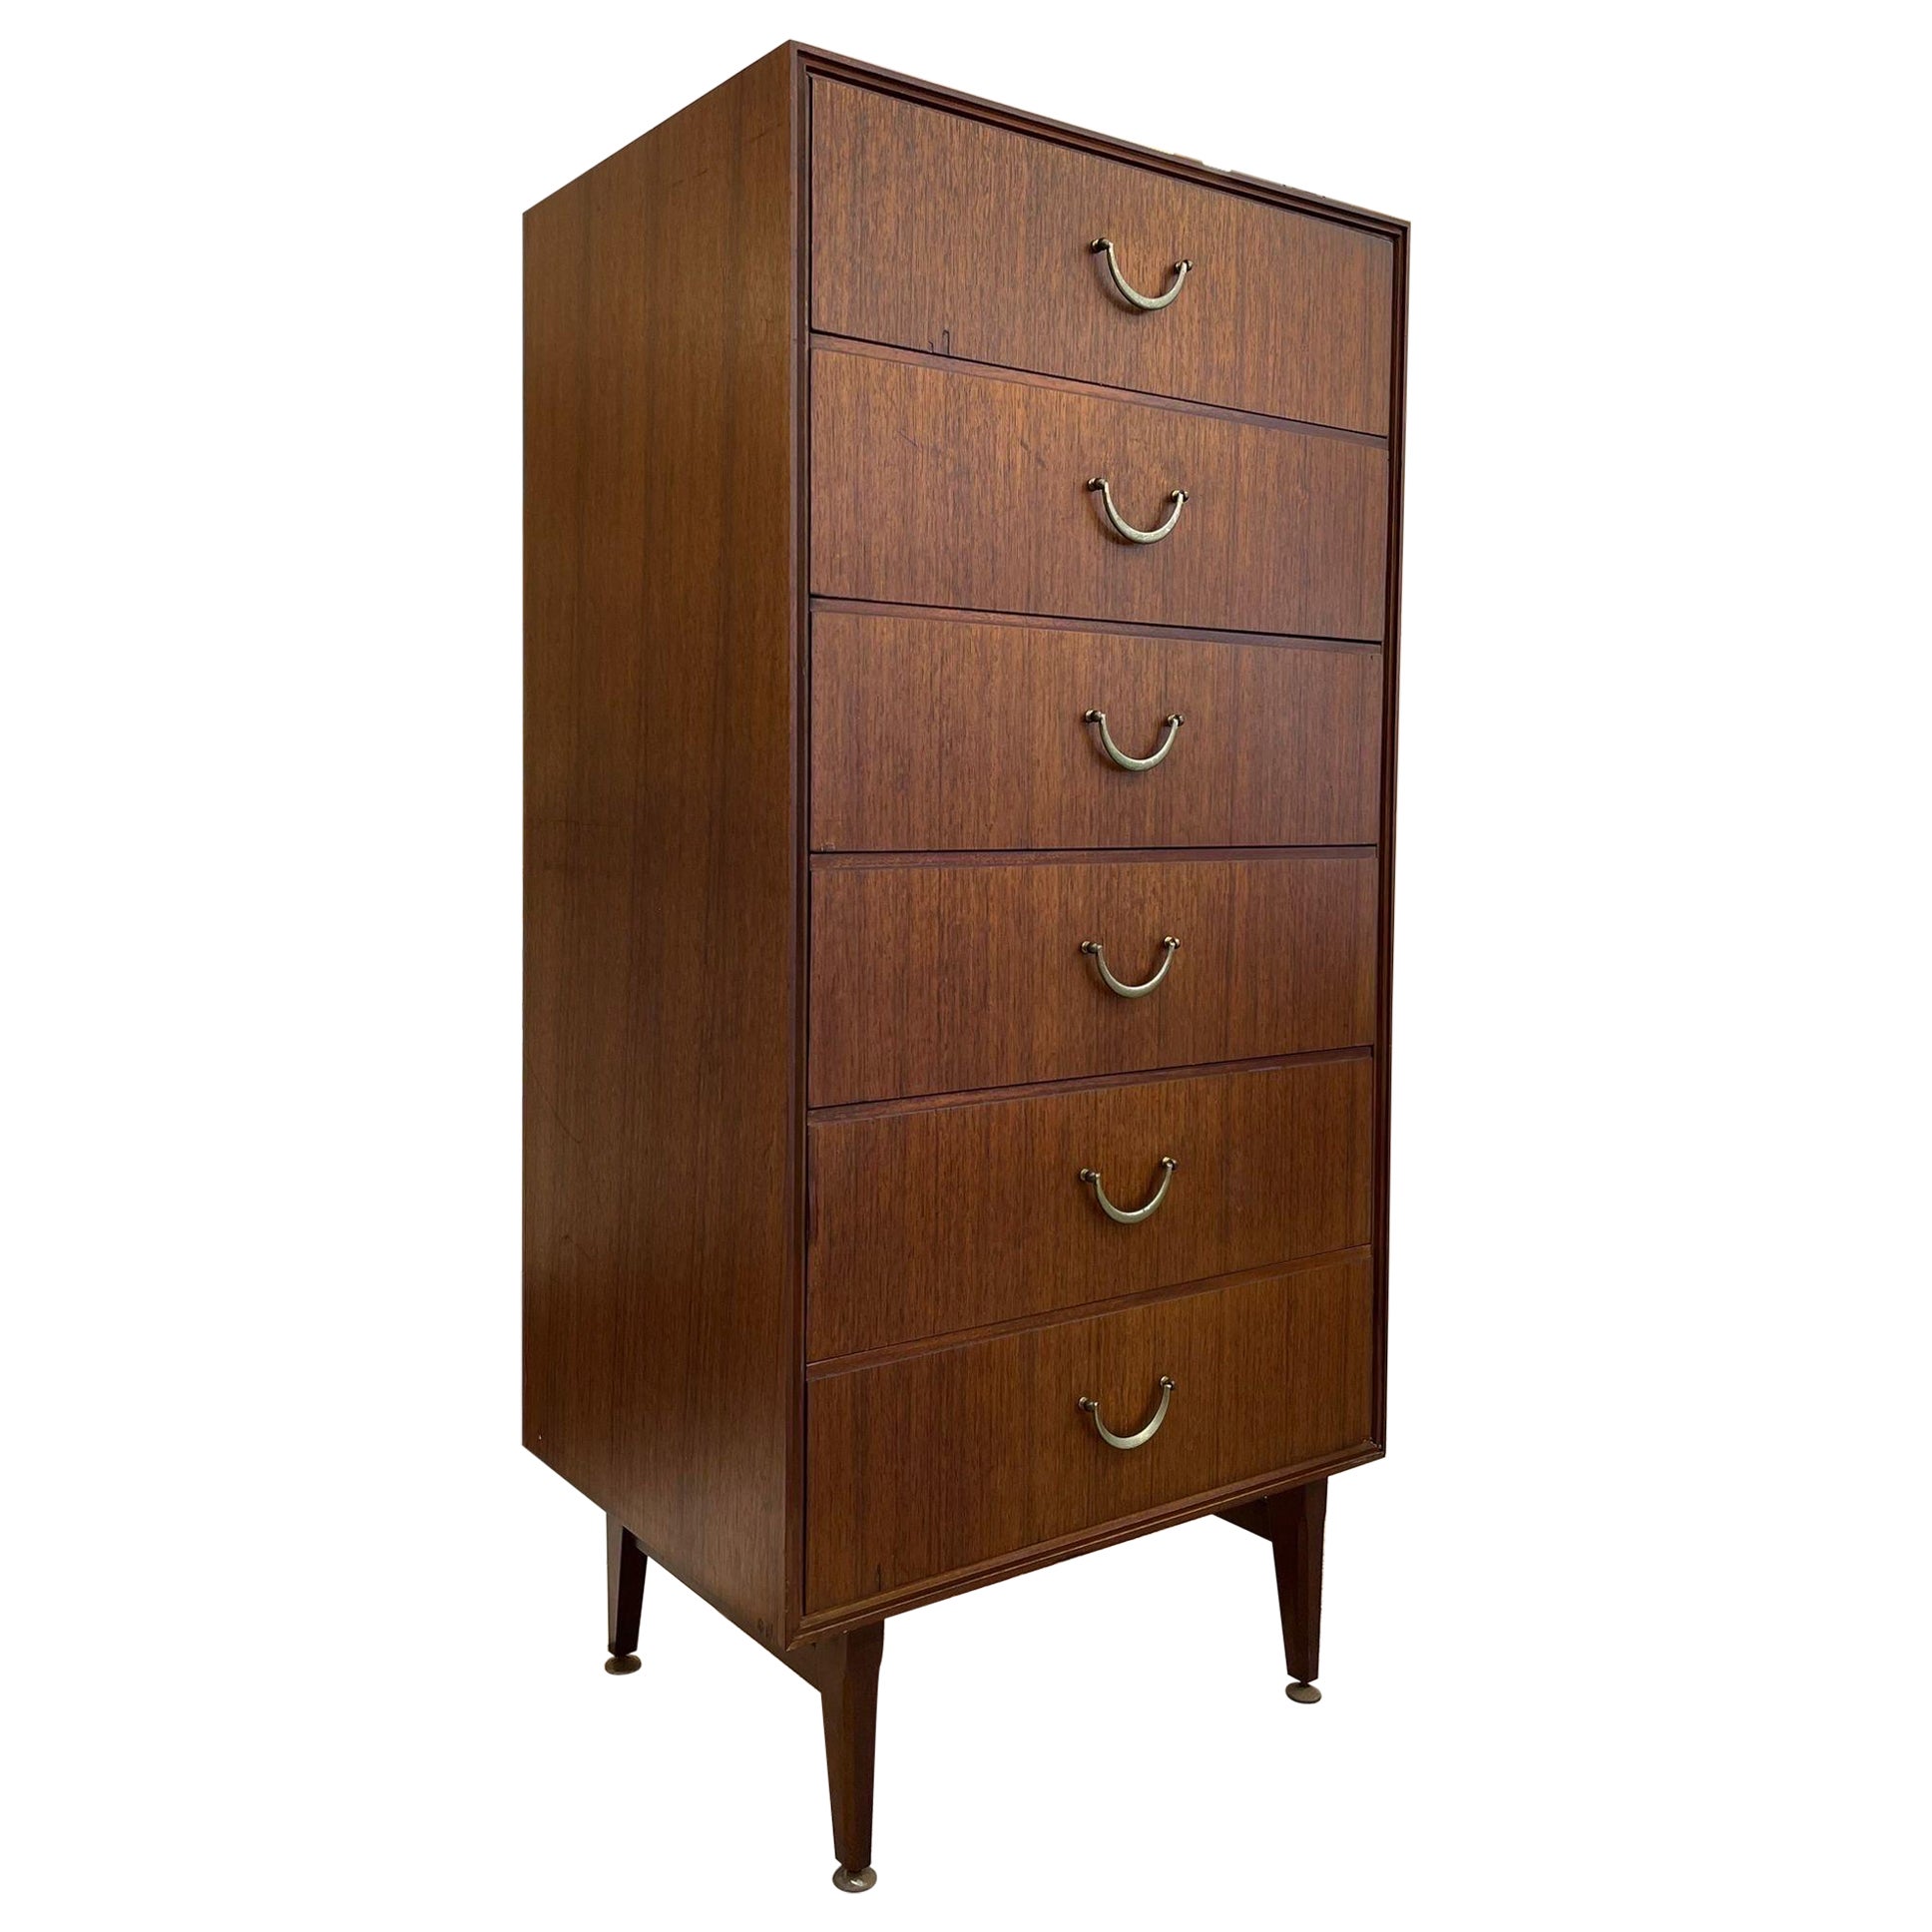 Vintage Mid Century Modern Tall Chest of Drawers Dresser by Meredew Uk Import. For Sale